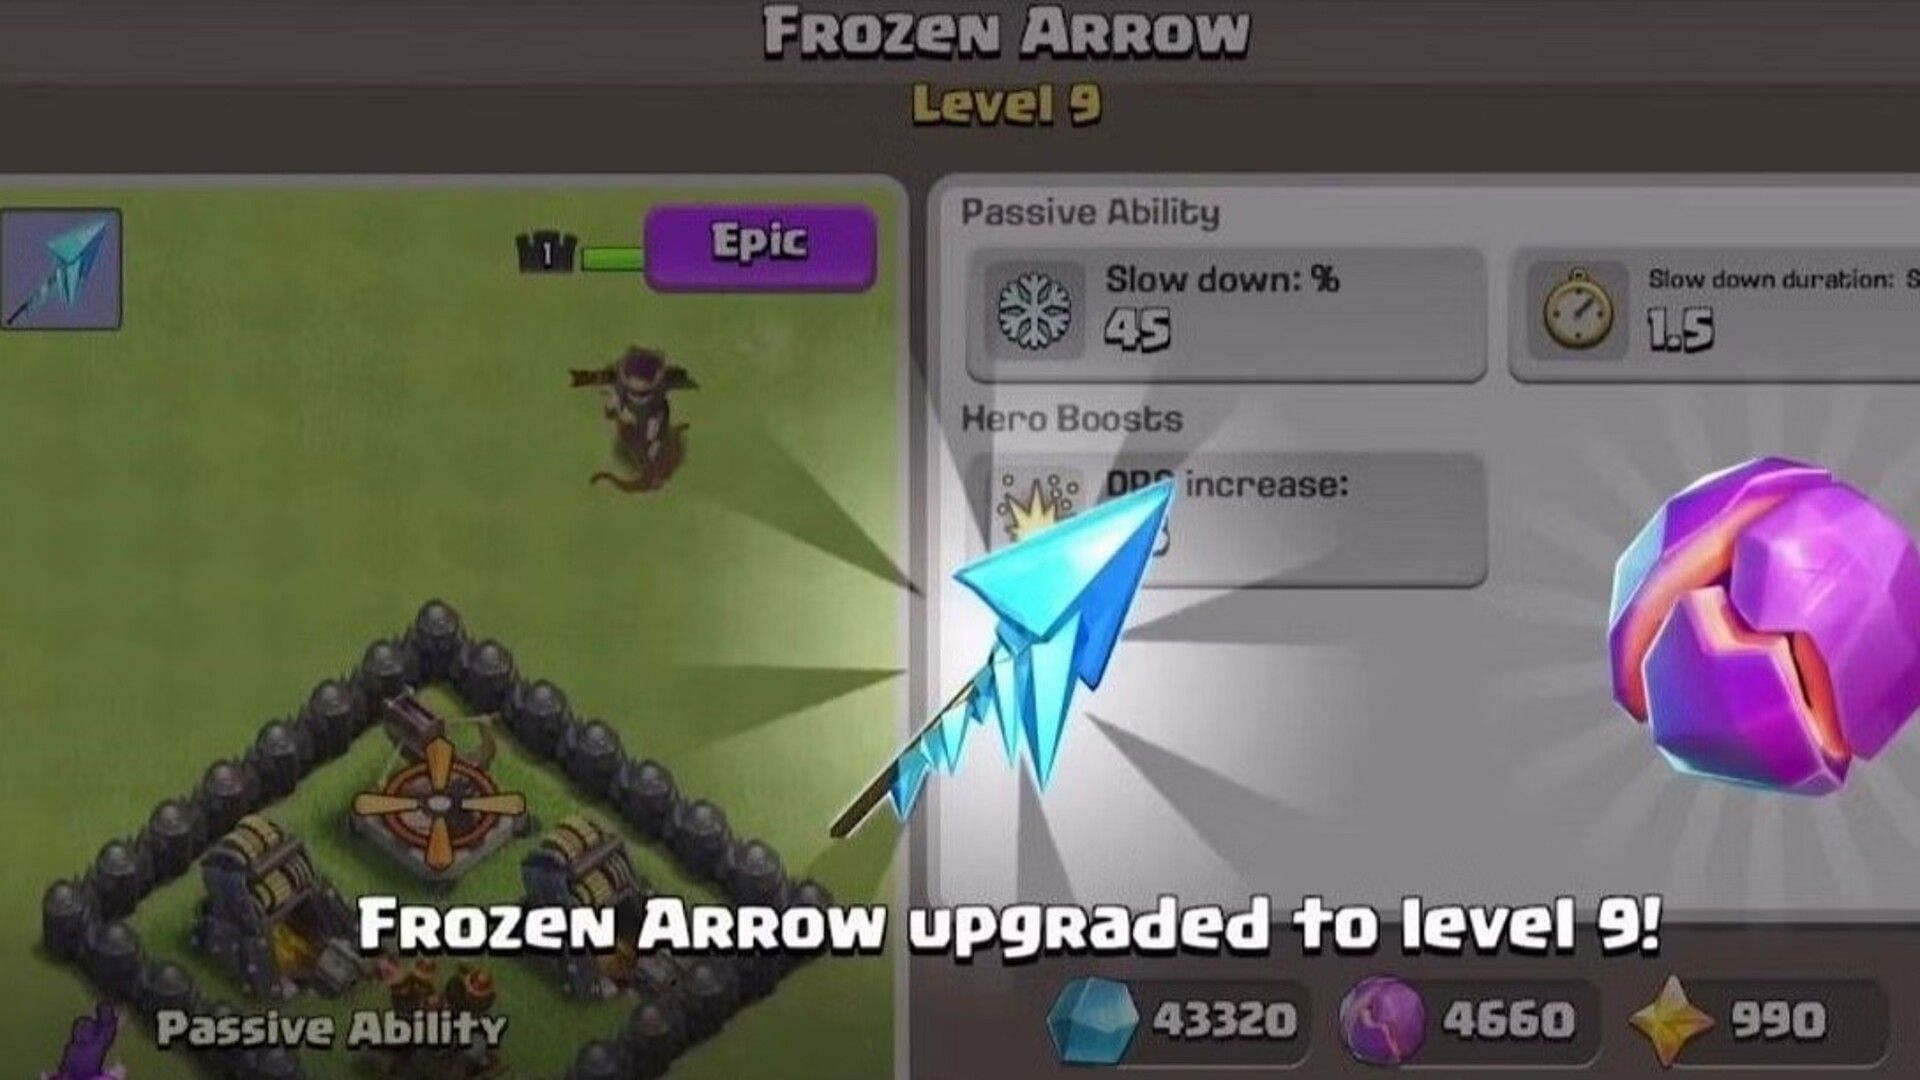 Frozen Arrow upgraded to Level 9 (Image via Supercell)